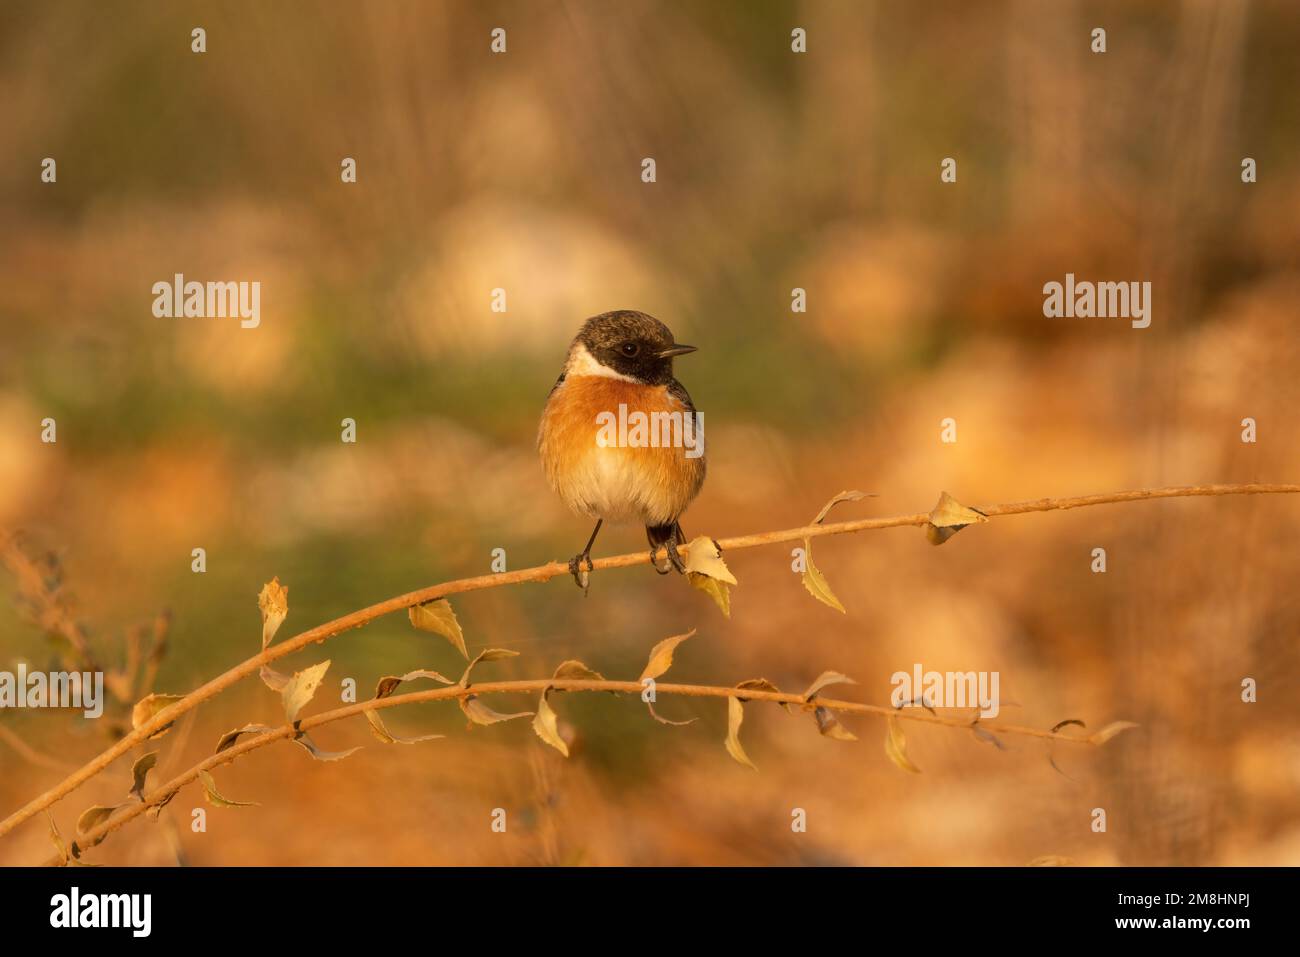 The European stonechat (Saxicola rubicola) is a small passerine bird that was formerly classed as a subspecies of the common stonechat. Stock Photo